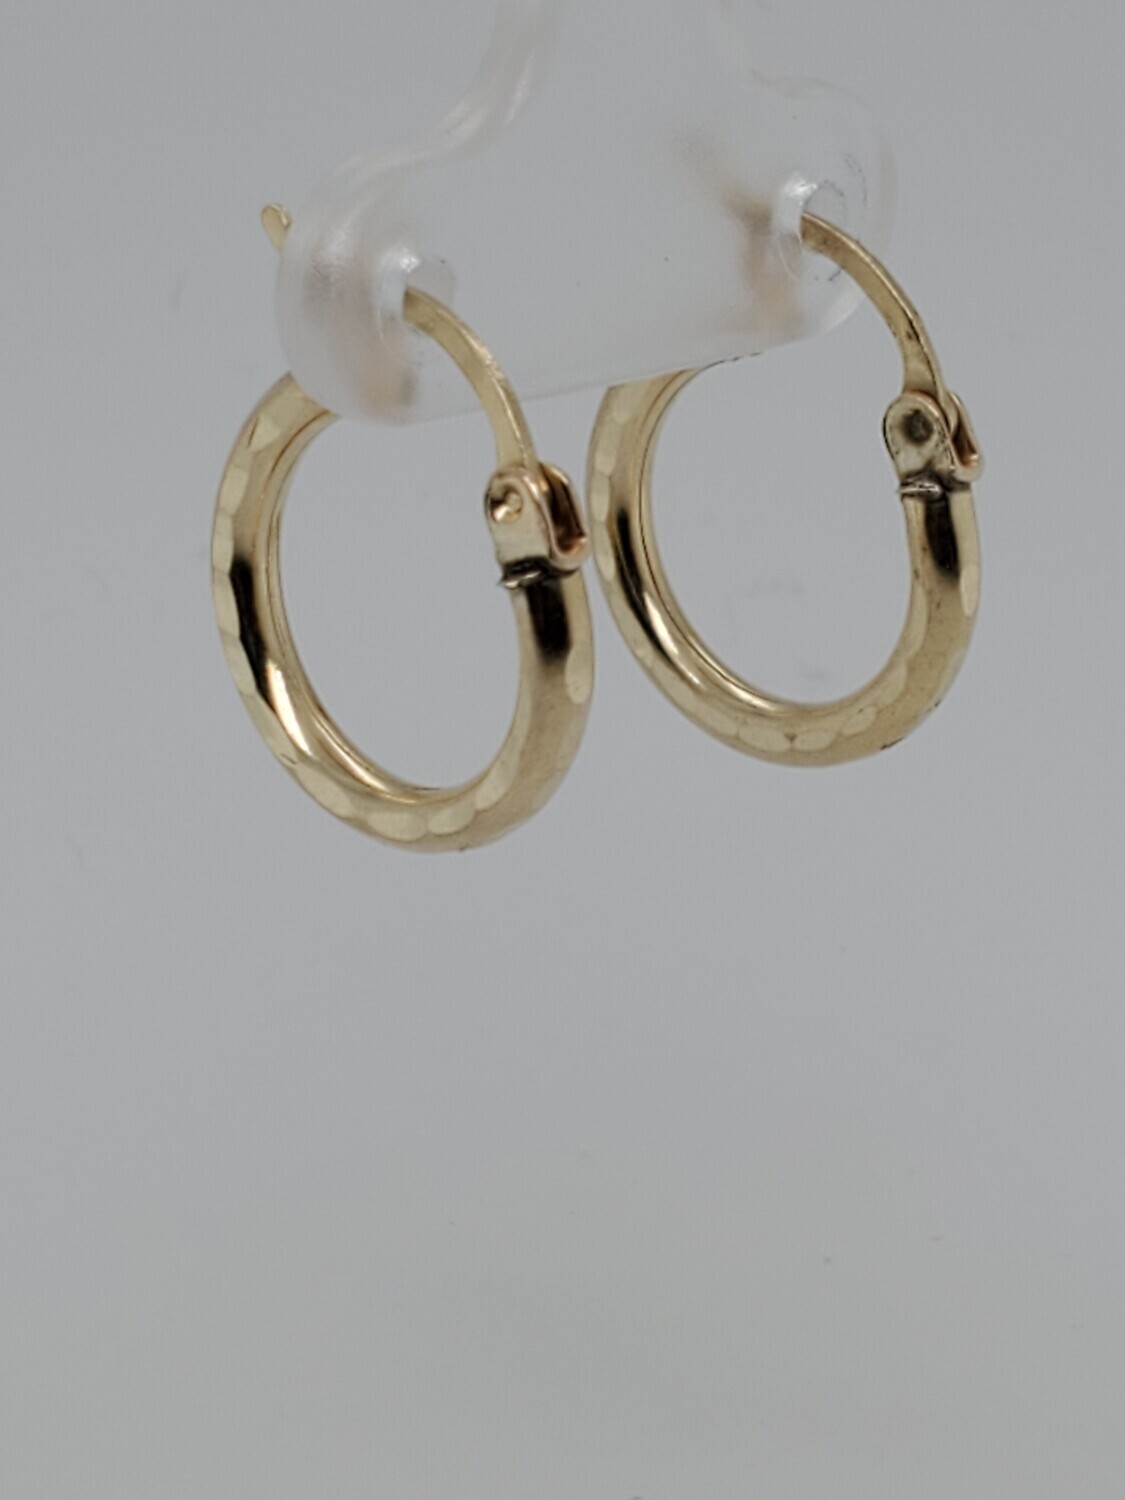 BRAND NEW!! 14KT SMALL HOLLOW HOOPS INVENTORY # I-18315 75TH AVE